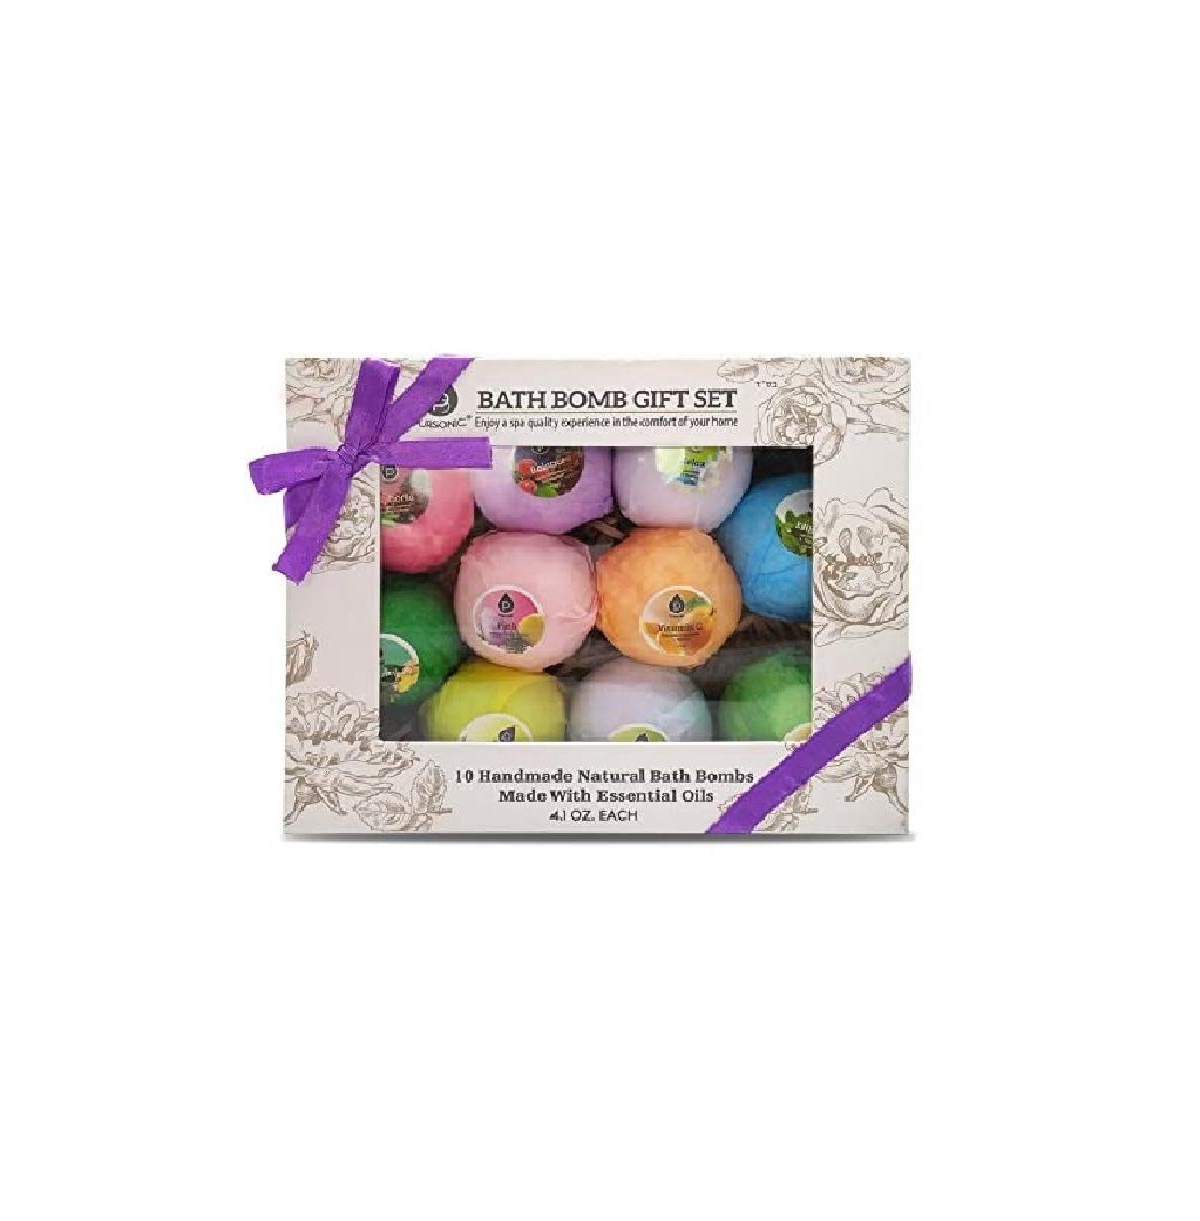 Bath Bombs Gift Set- Handmade, Natural and Organic Ingredients, 10 Count - Assorted Pre-pack